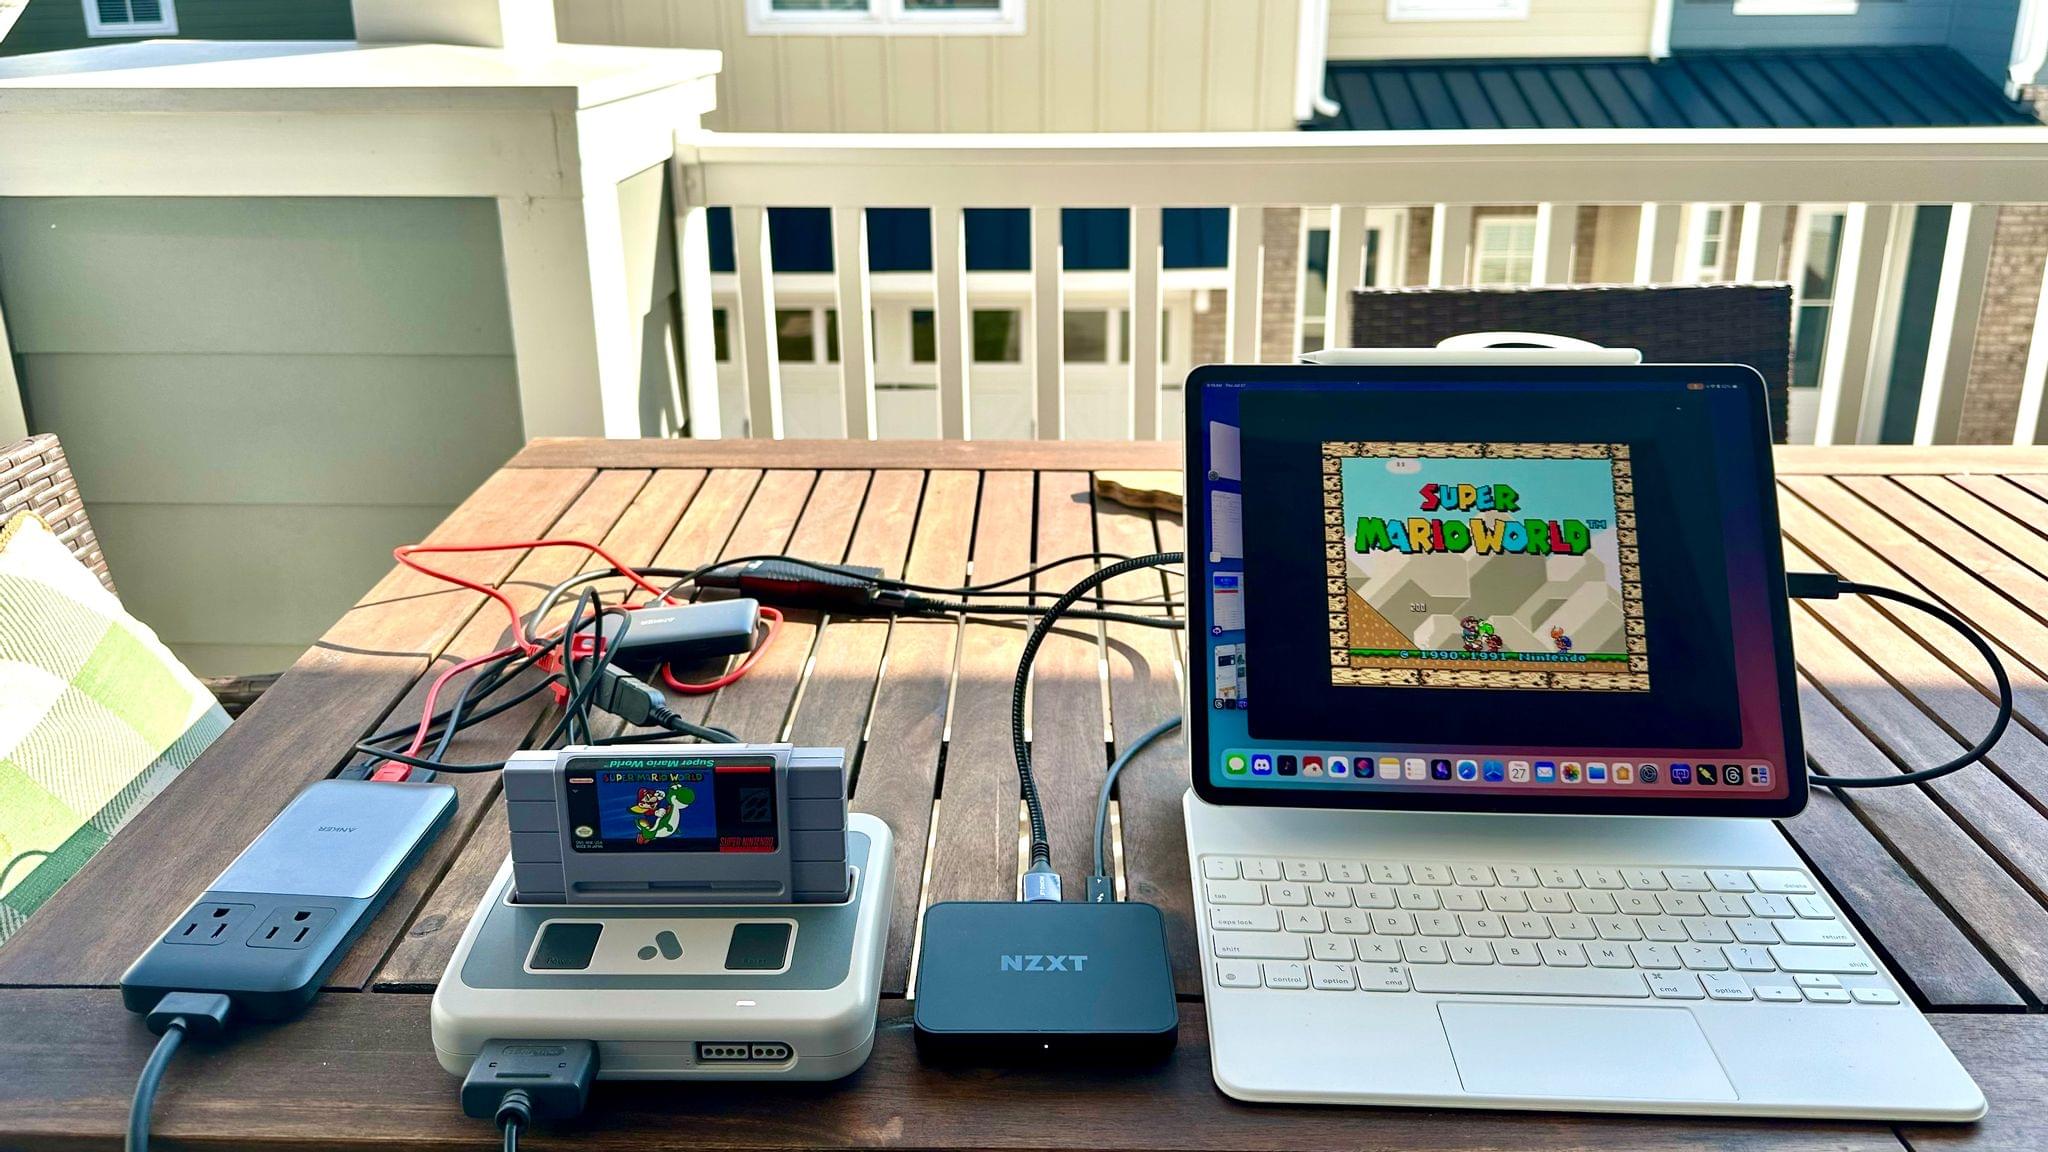 The Analogue Super NT running on an iPad Pro.